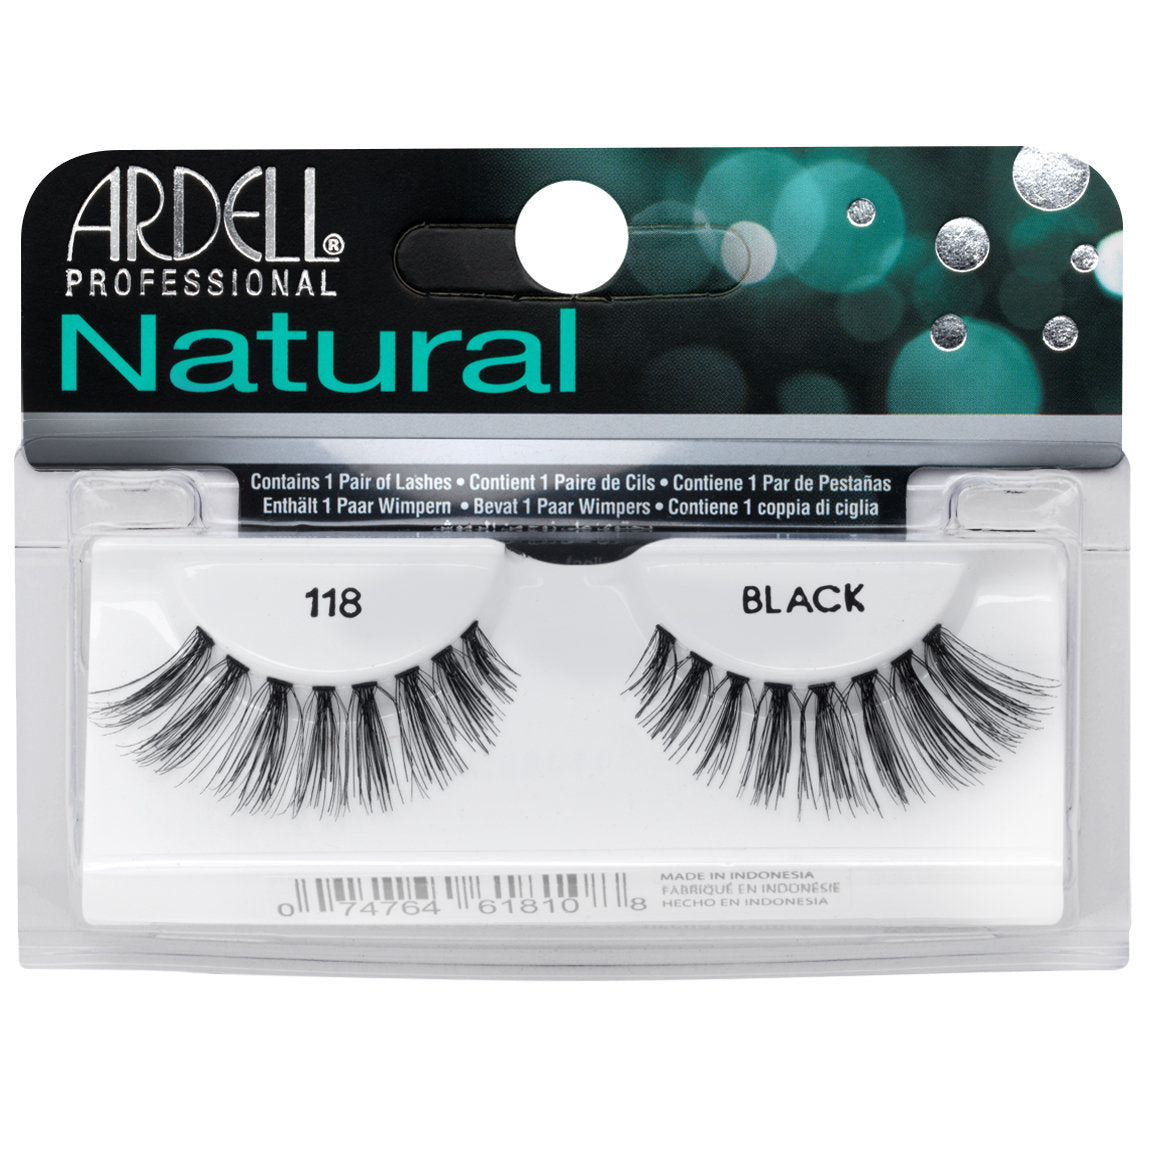 Ardell Professional Natural Lightweight Lashes, 118 Black